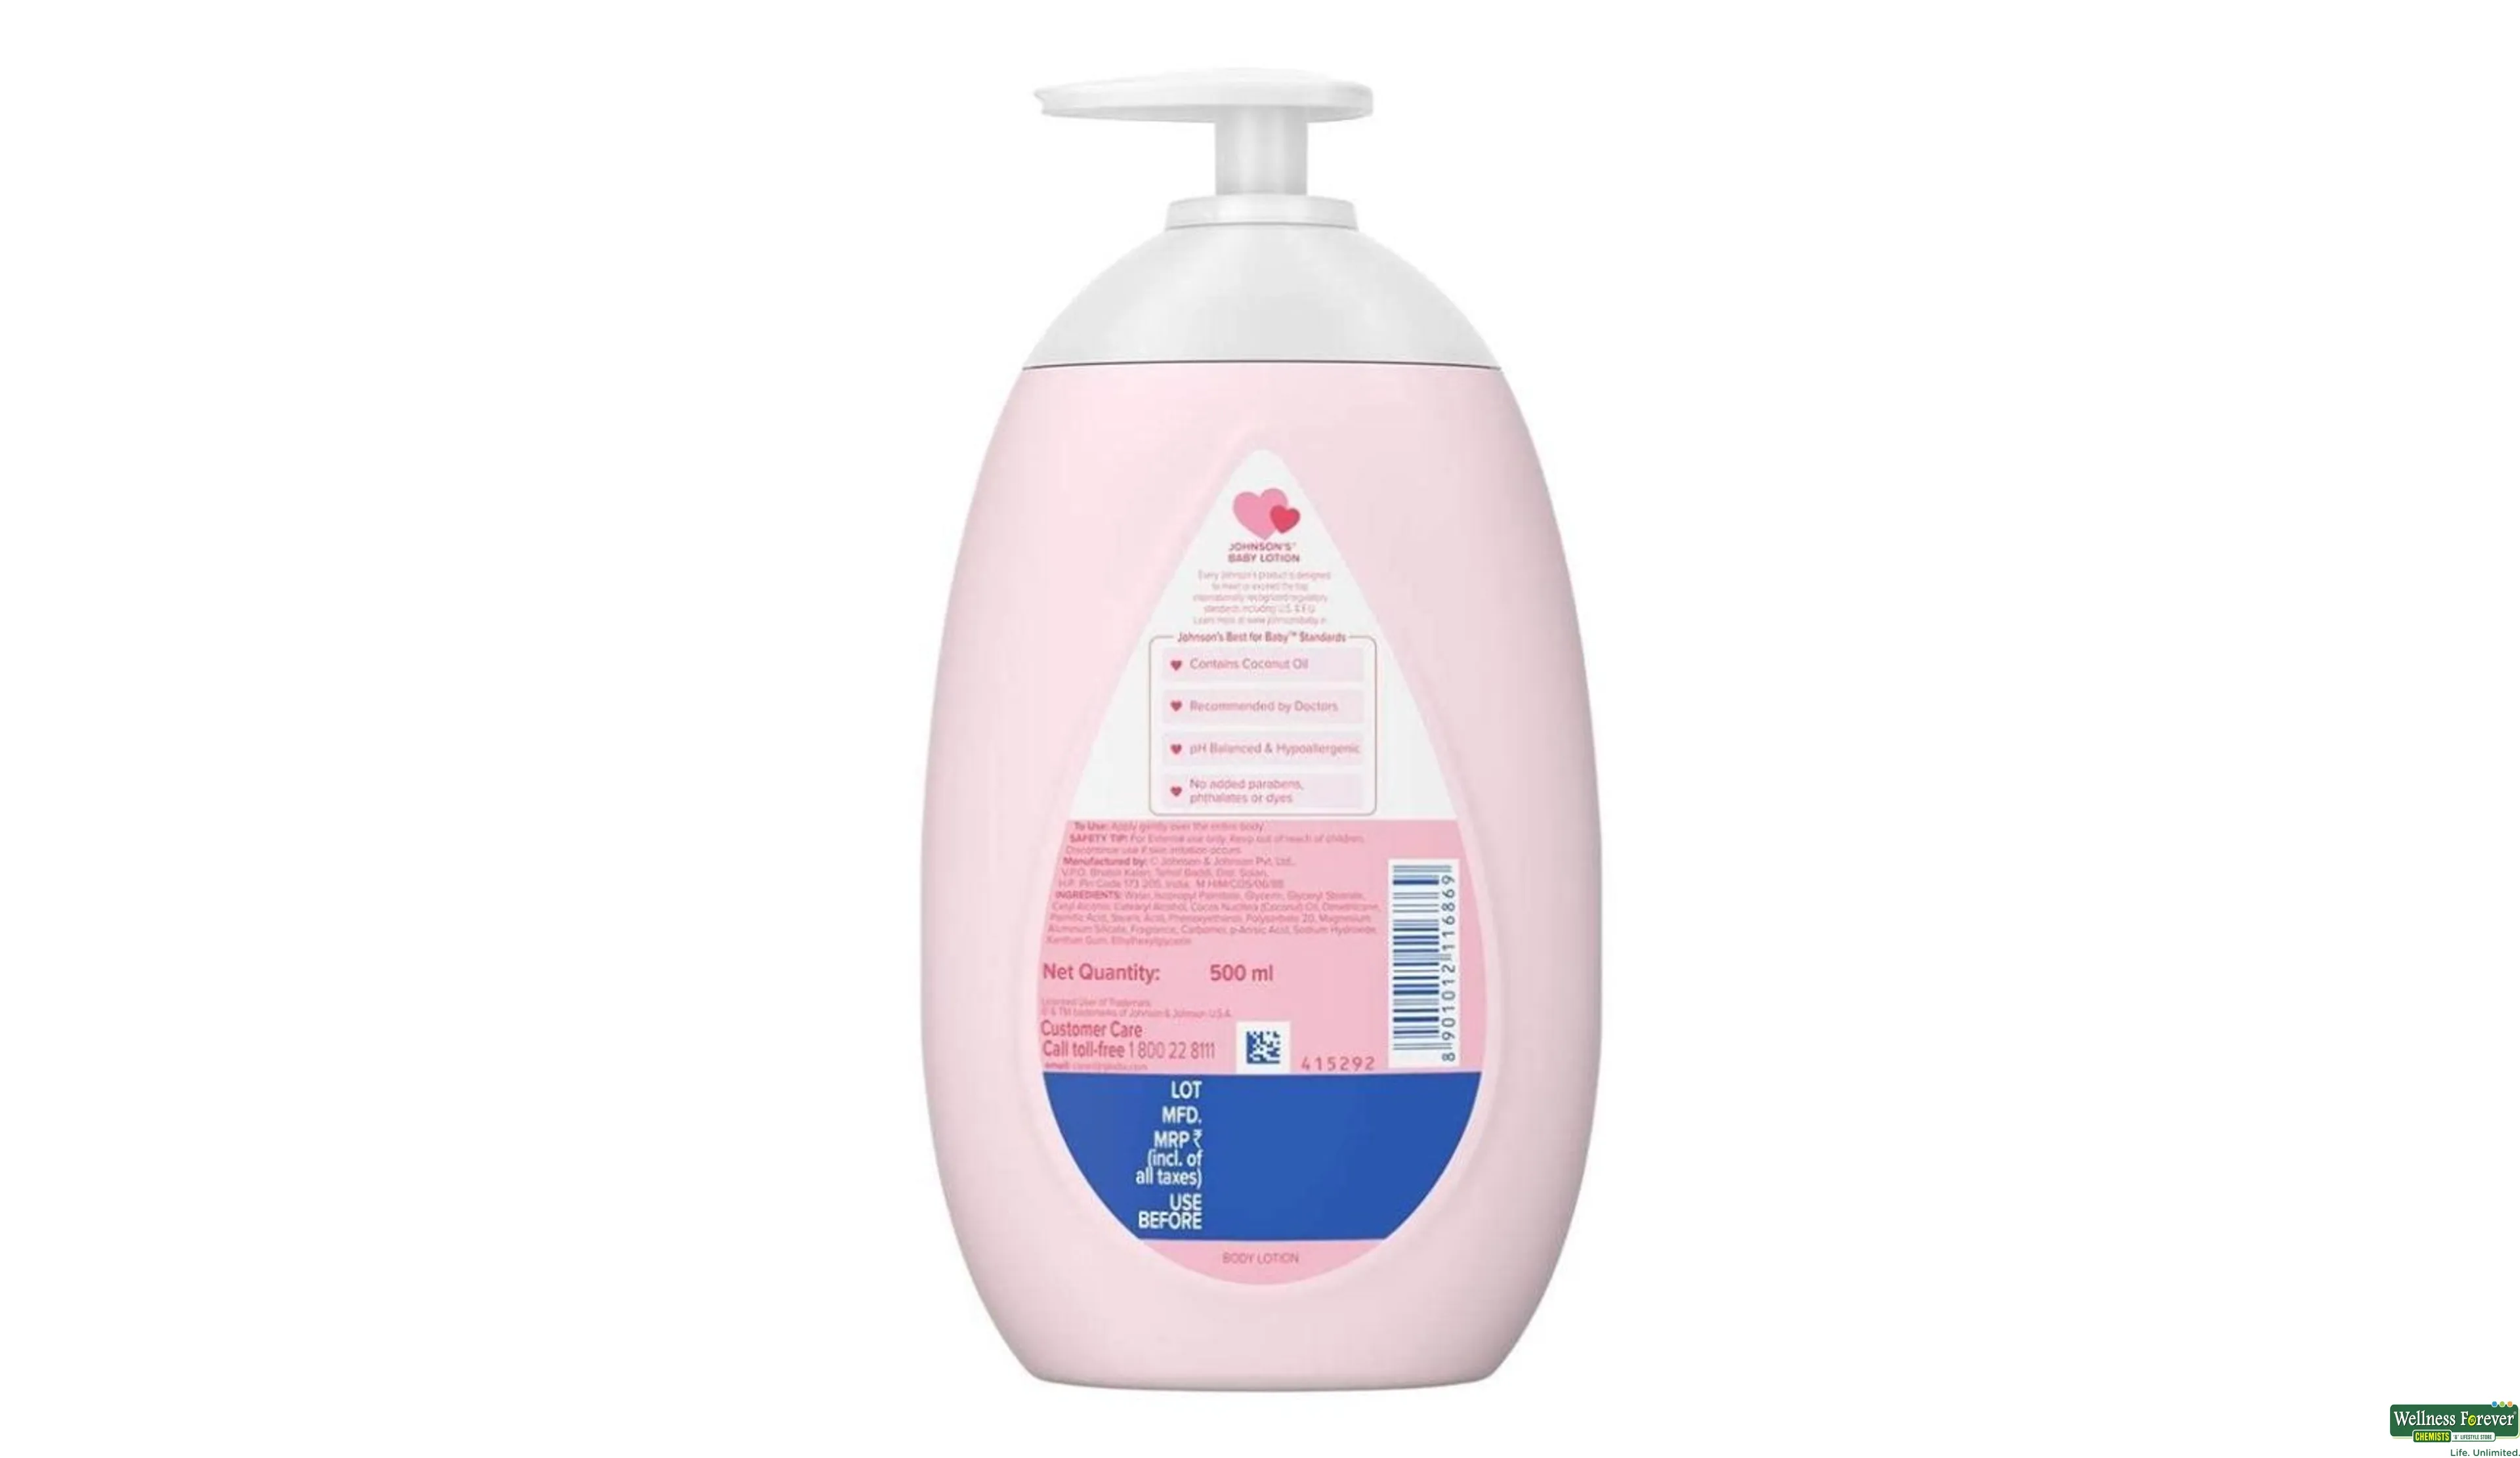  JOHNSON'S Baby Lotion 500ml – Gentle and Mild for